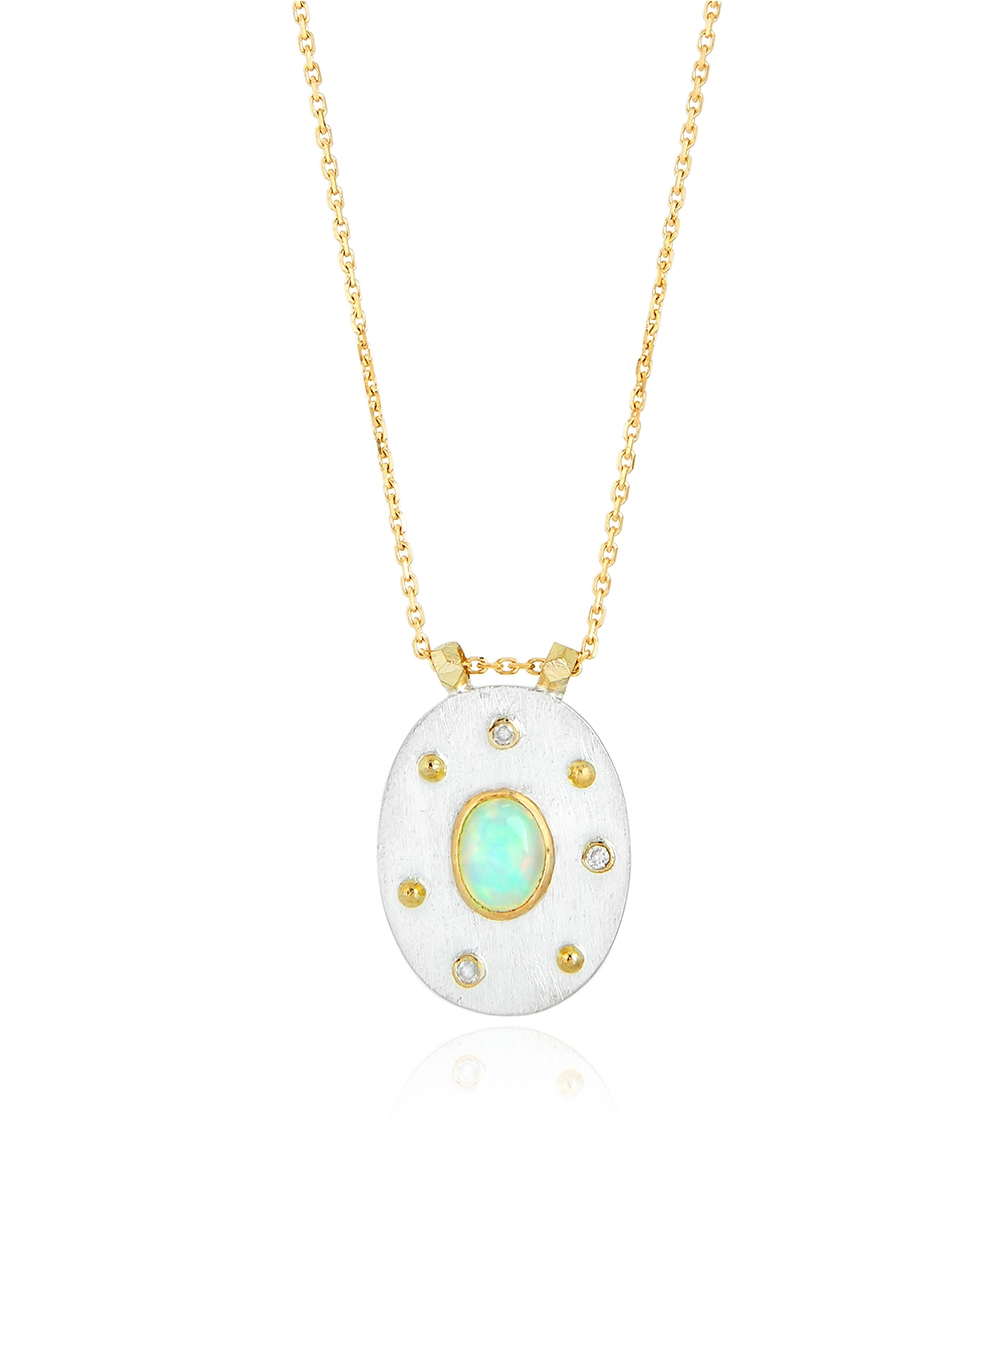 SILVER GOLD AND OPAL NECKLACE